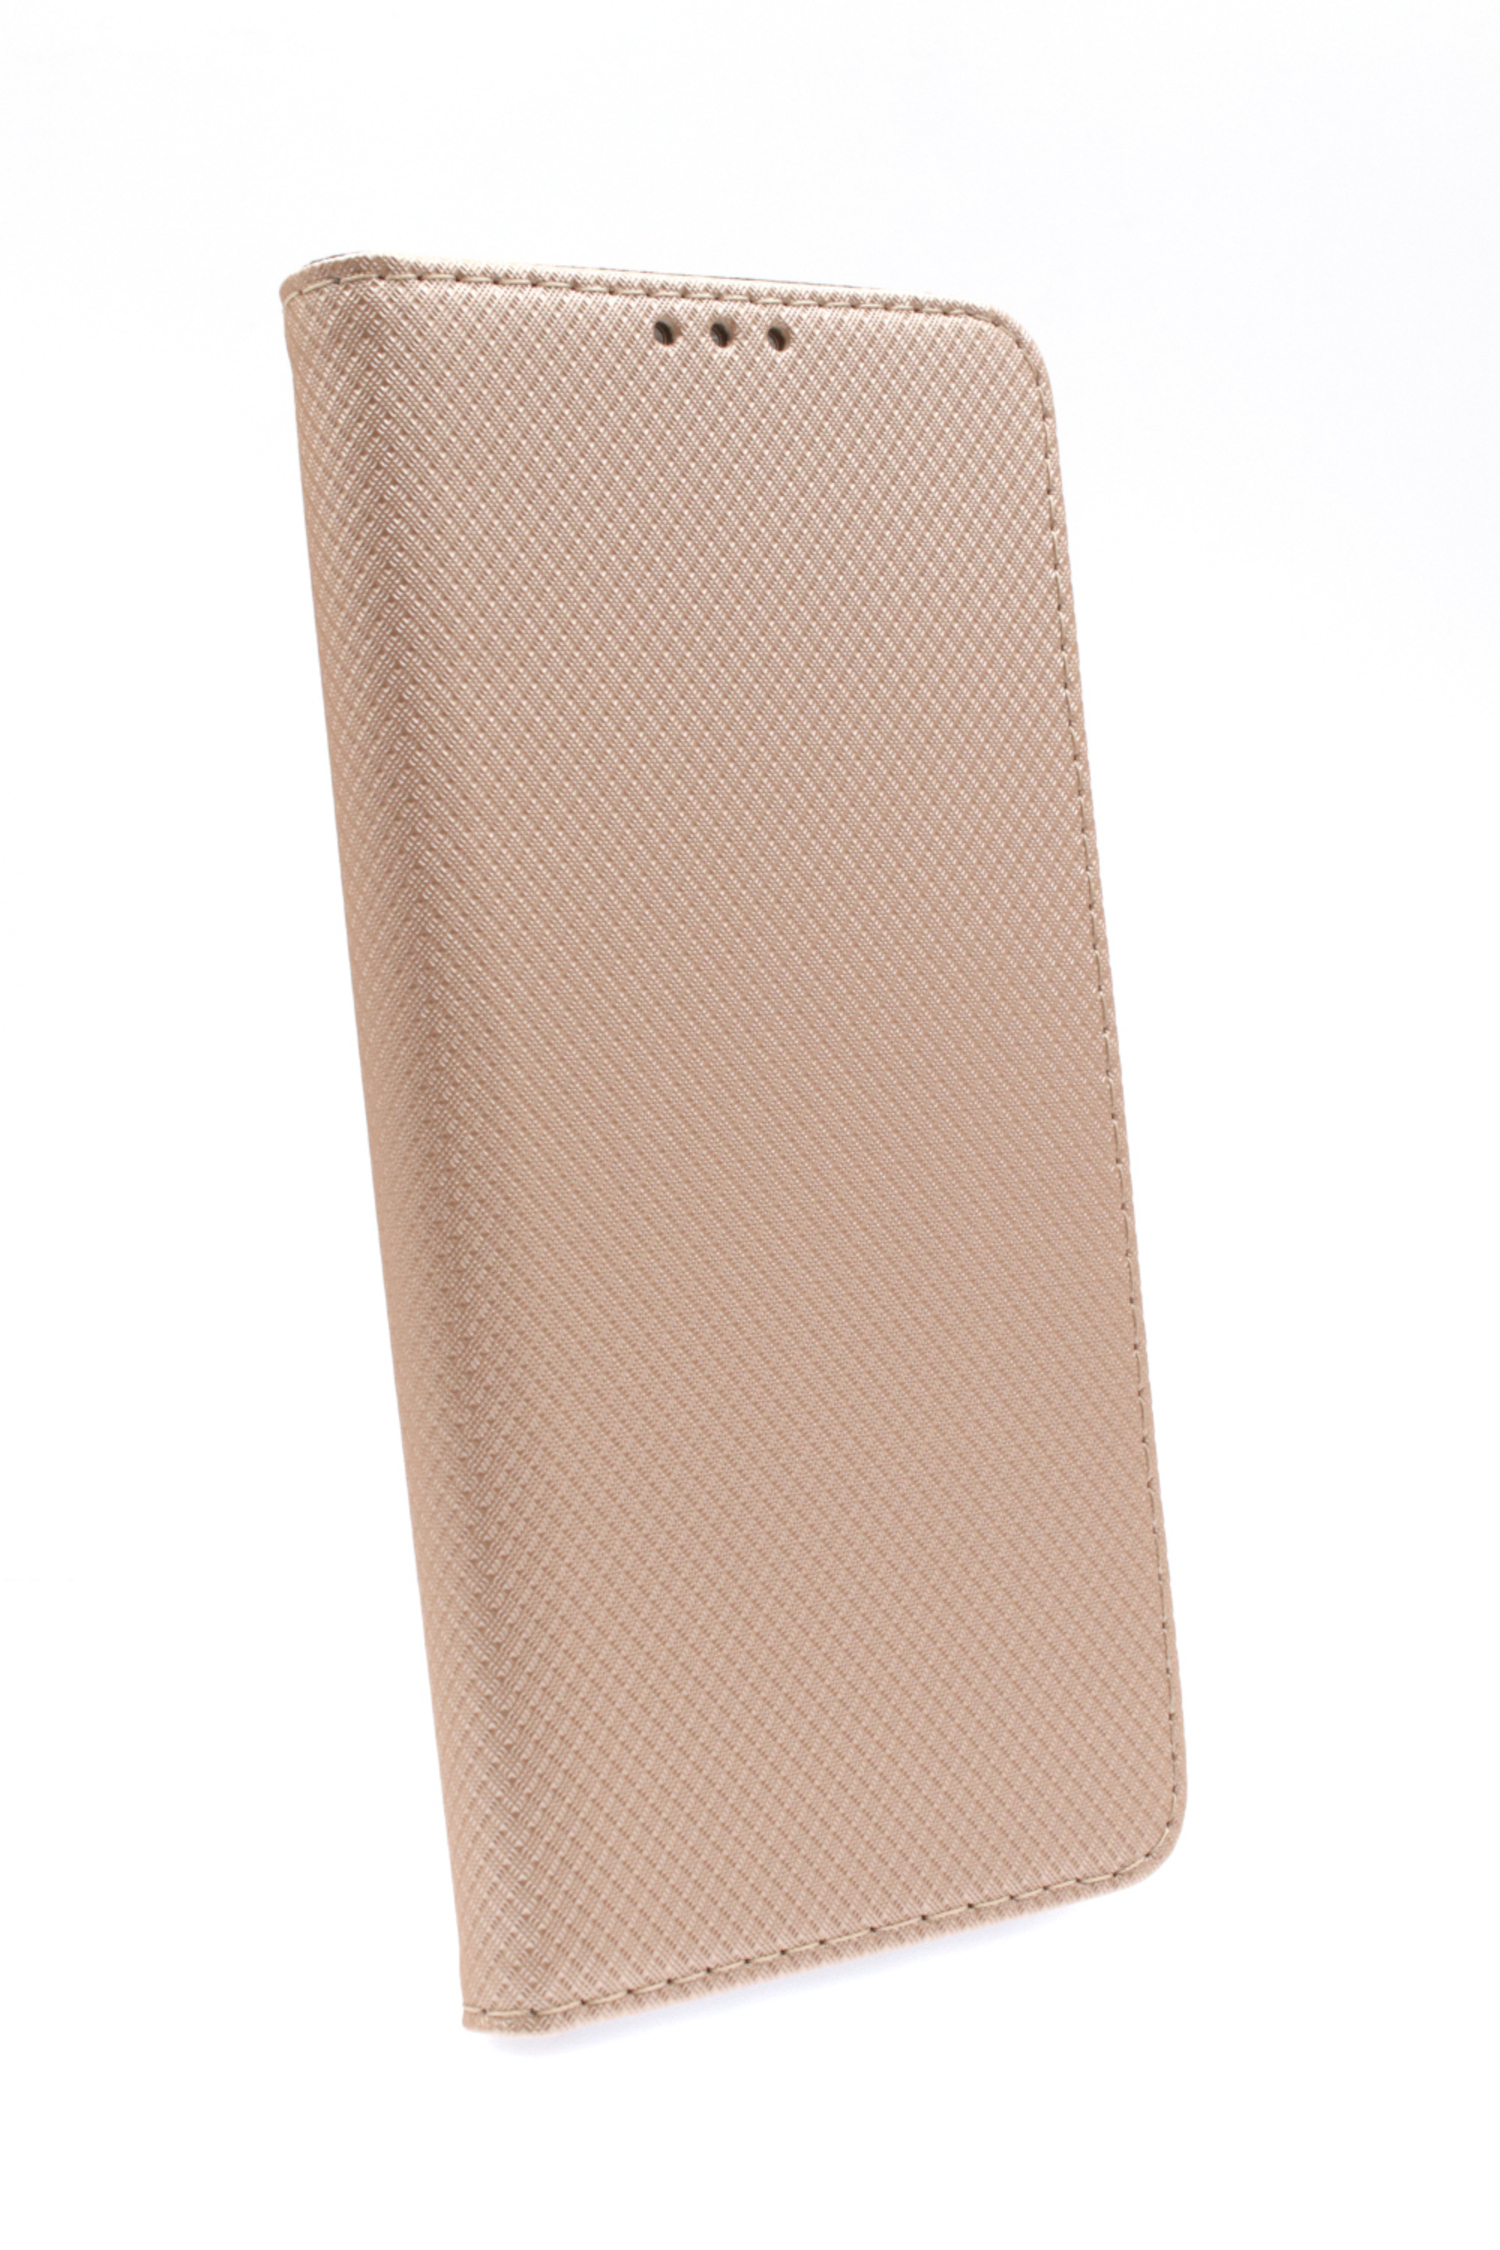 Texture, JAMCOVER Gold 5G, A23 Galaxy Samsung, Bookcover, Bookcase